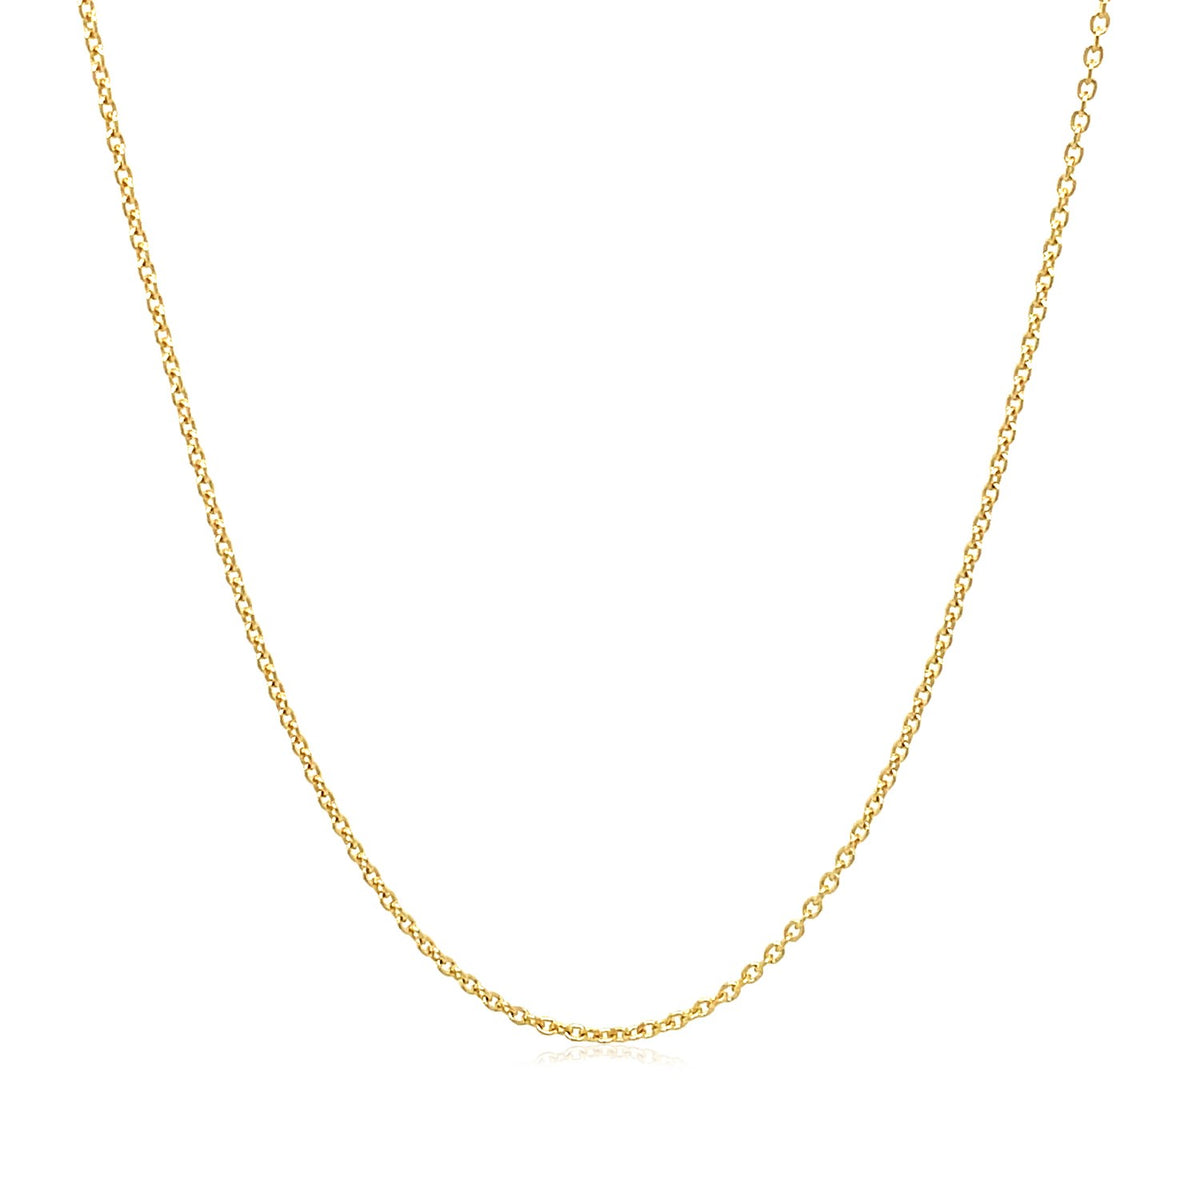 Round Cable Link Chain - 14k Yellow Gold 1.10mm